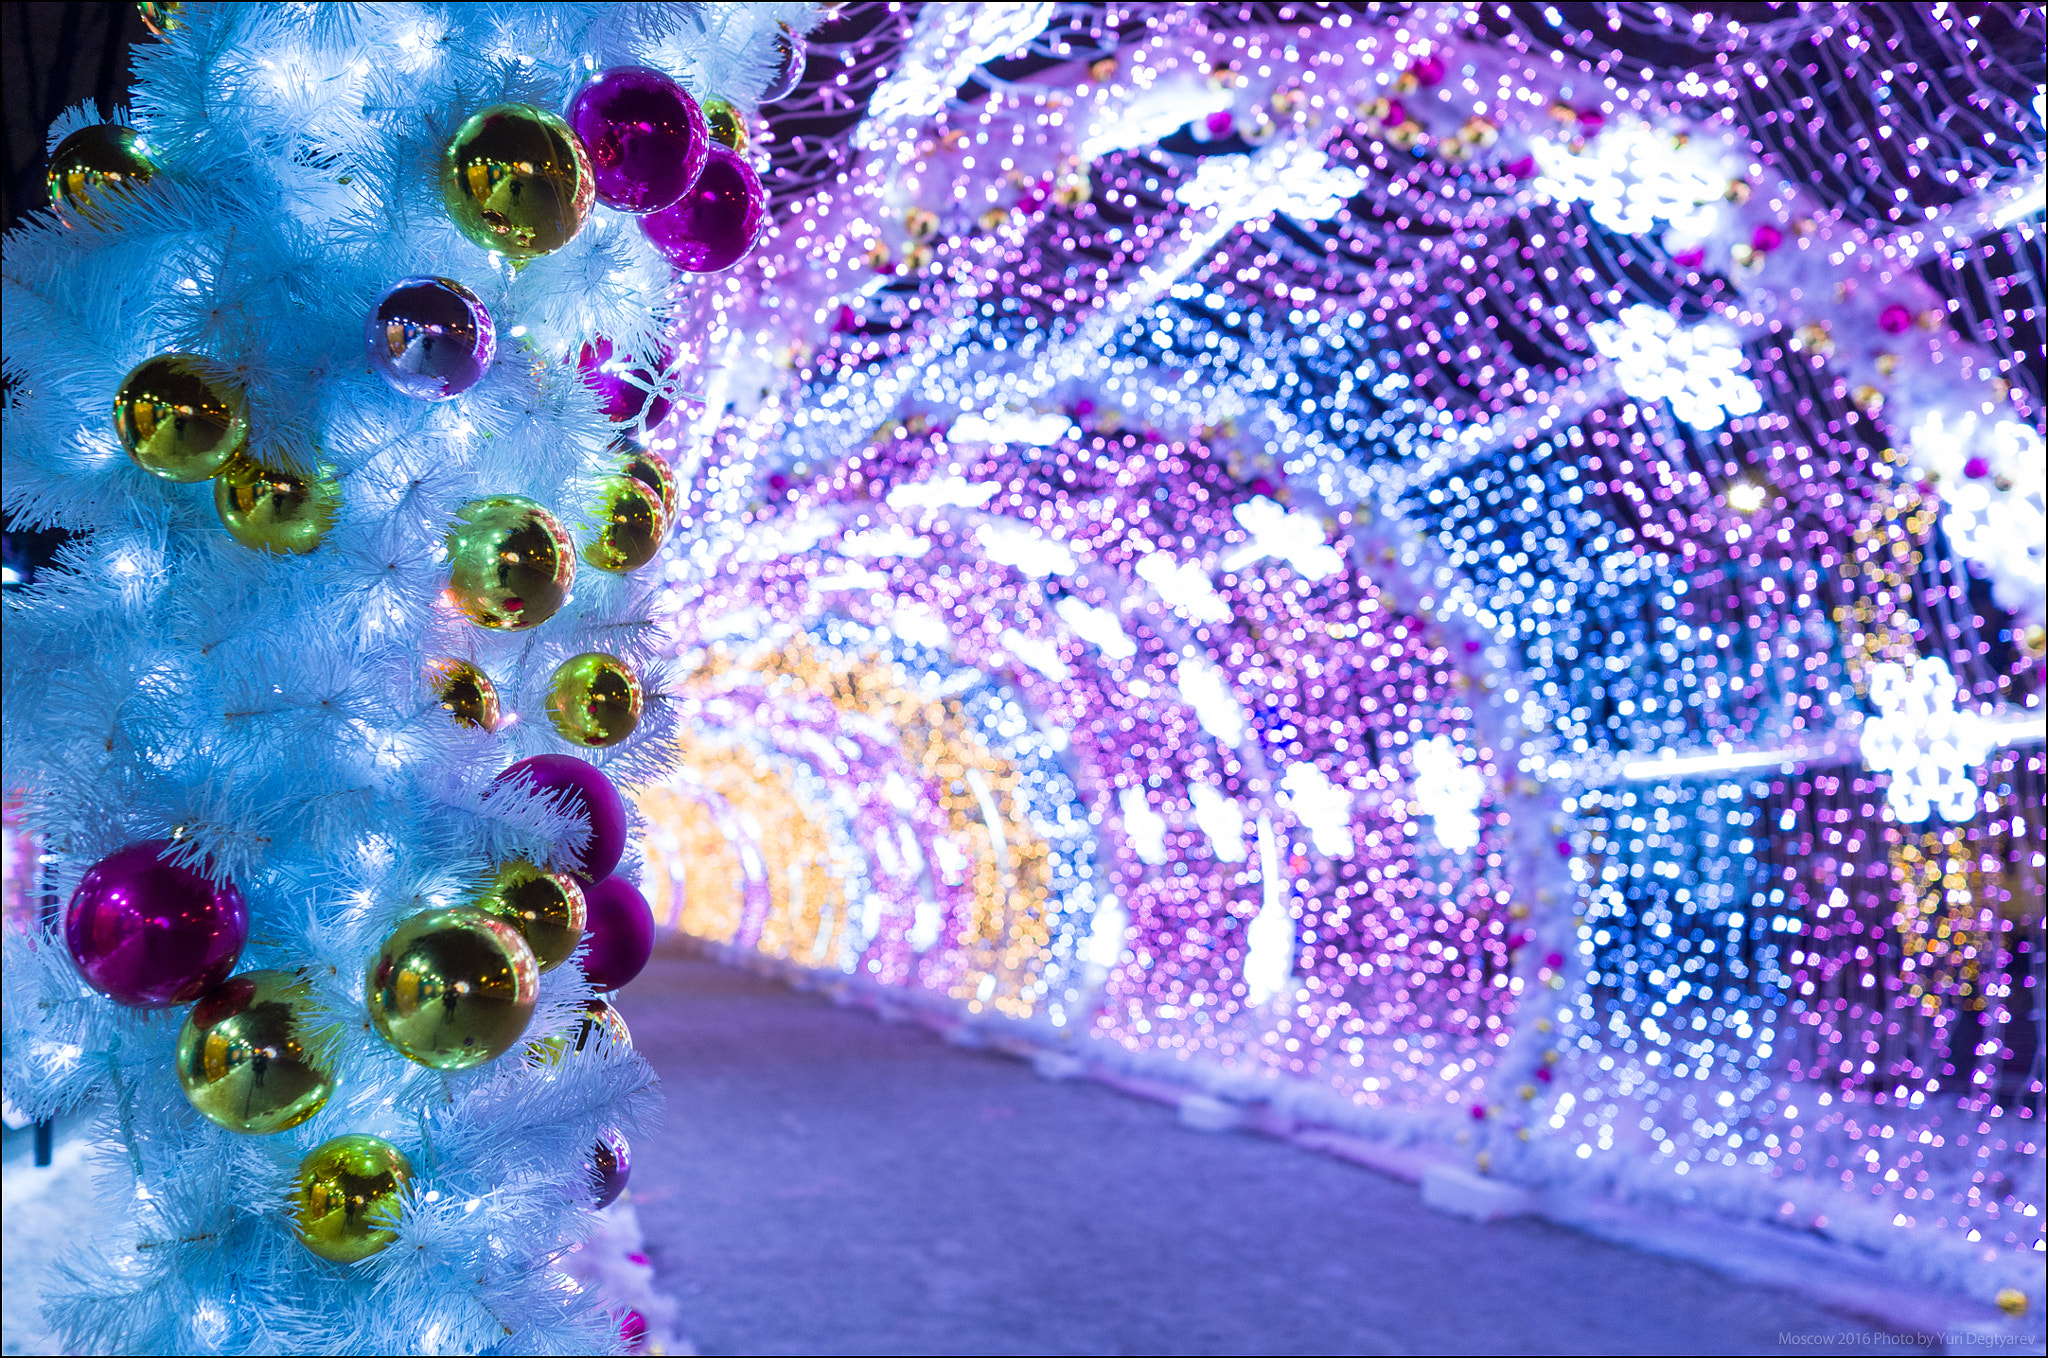 Leica X-U (Typ 113) sample photo. Russia. moscow. christmas decoration on boulevard. photography